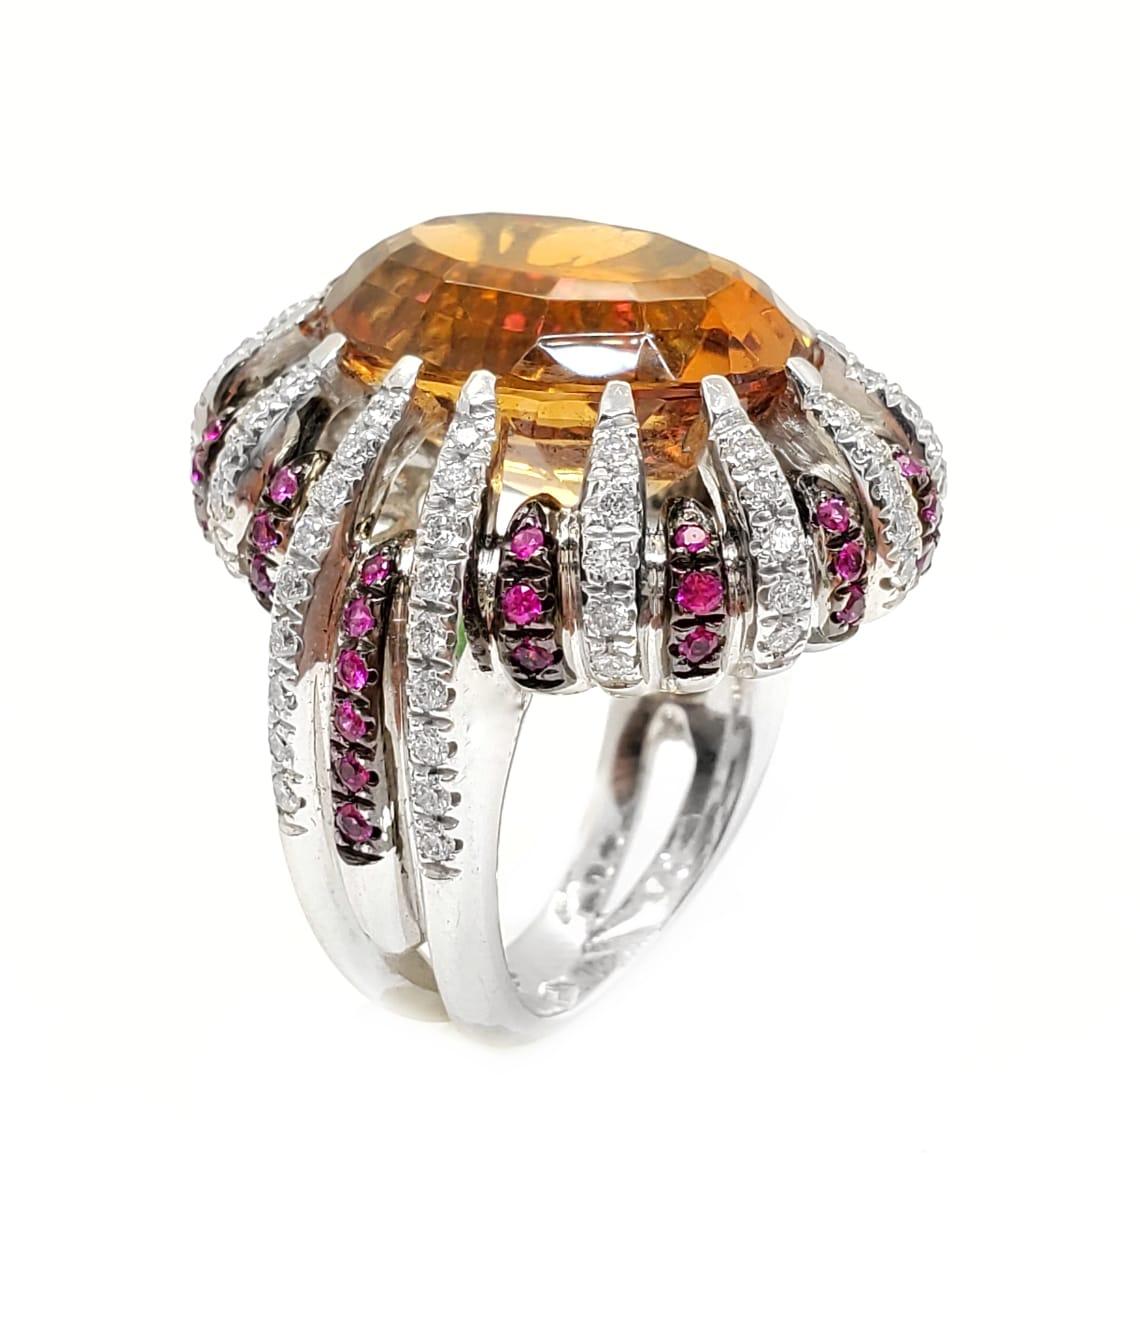 Mixed Cut Andreoli Diamond Citrine Pink Sapphire 18 Karat White Gold Ring For Sale